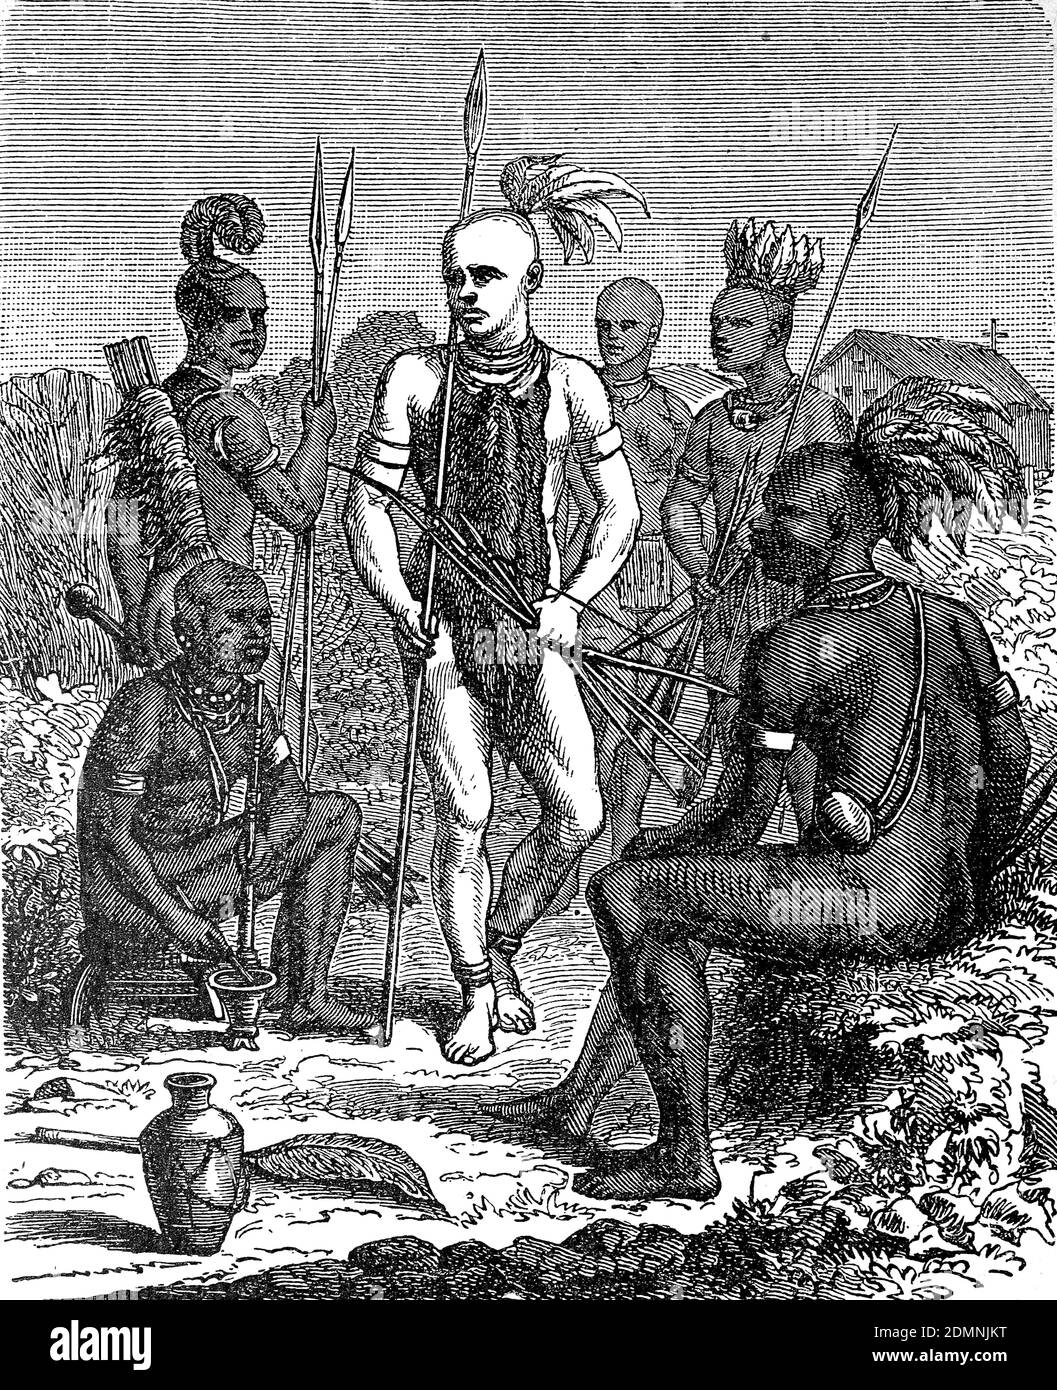 Albino, Albinism, among the Bari tribe at the white Nile in Sudan, illustration from 1878  /  Albino, Albinismus, beim Stamm der Bari am weißen Nil in Sudan, Illustration aus 1878, Historisch, historical, digital improved reproduction of an original from the 19th century / digitale Reproduktion einer Originalvorlage aus dem 19. Jahrhundert, Stock Photo